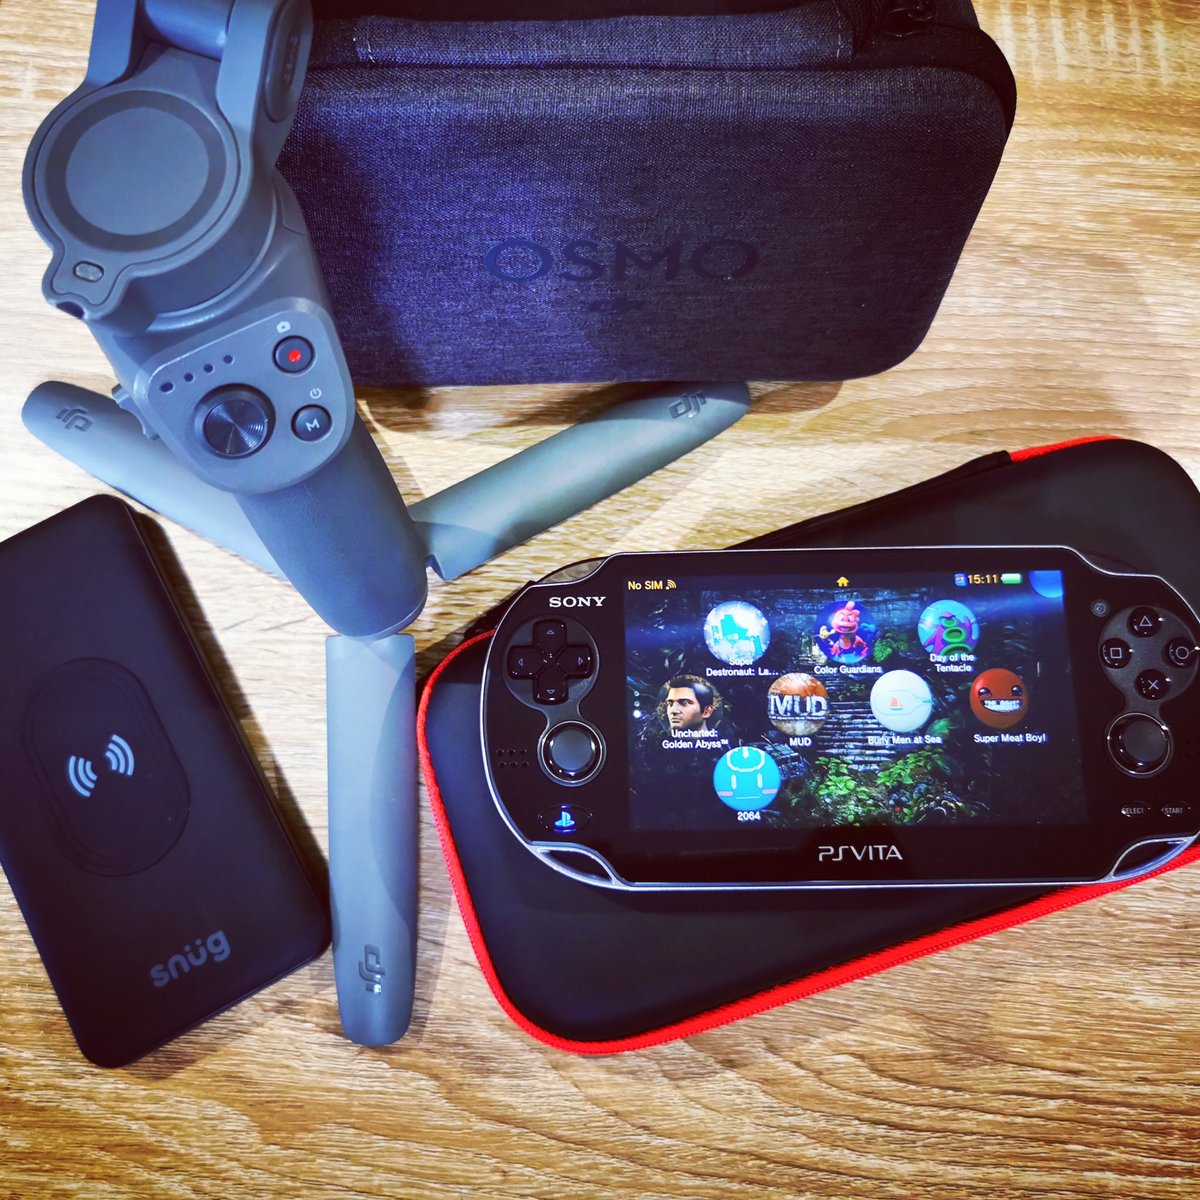 We are going on vacation tomorrow and of course, I can't forget some of my favourite travel essentials😍

#DJIOsmo #PSVita #PSVitaIsland